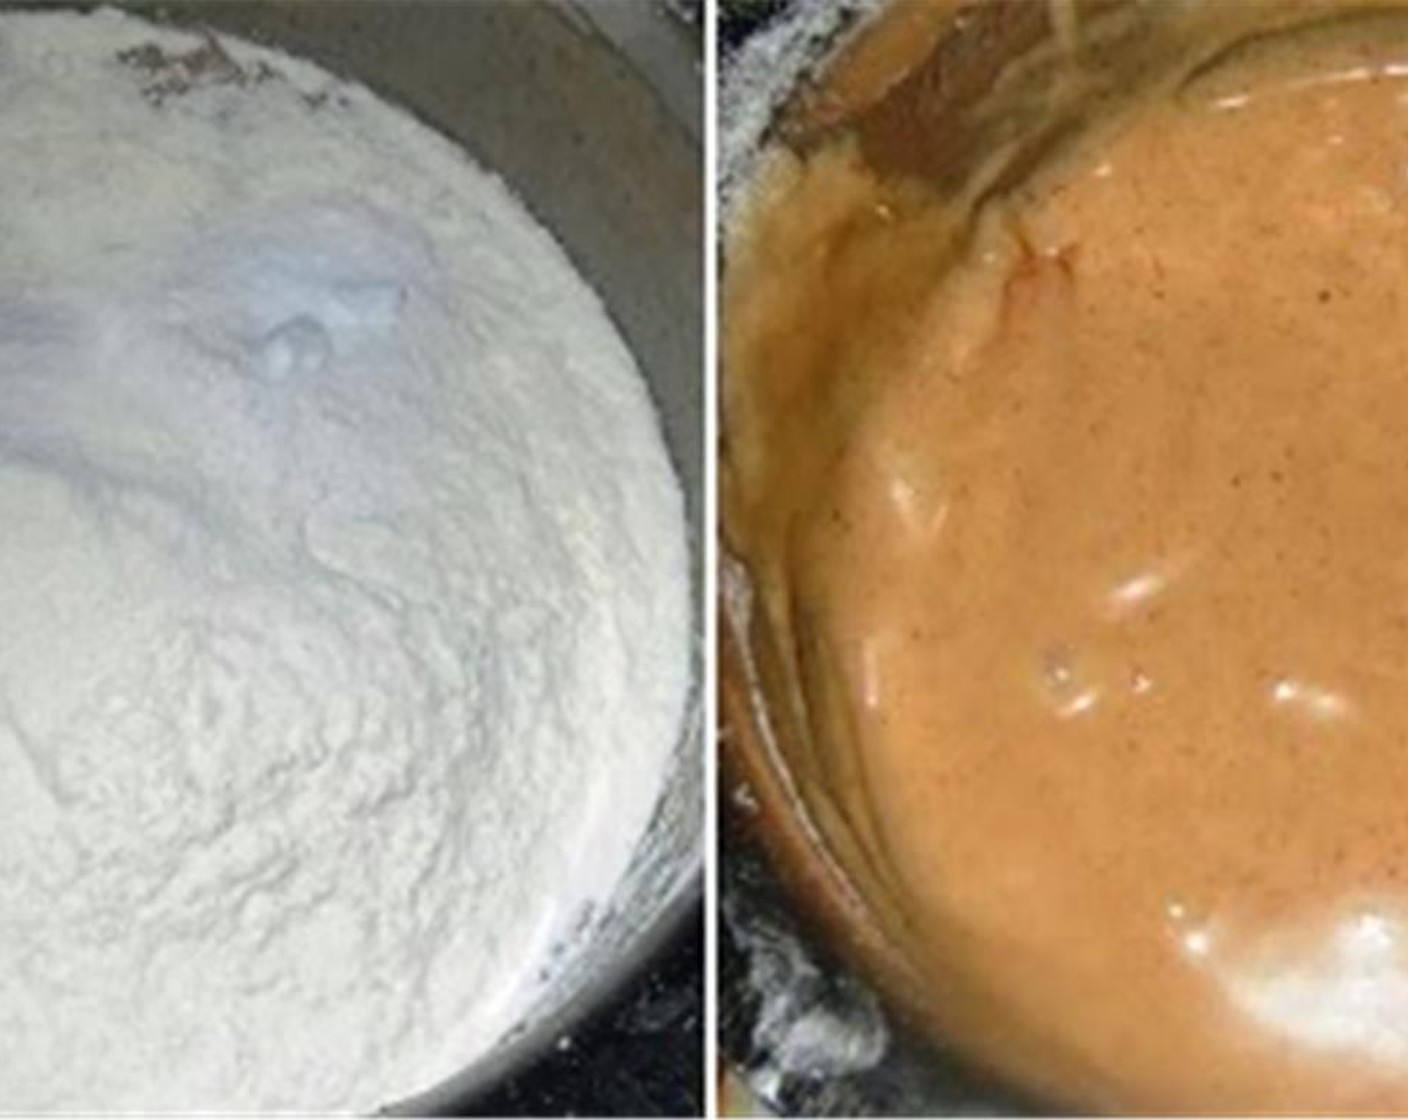 step 4 Sift in All-Purpose Flour (1 cup), Salt (1 pinch), Baking Powder (1/2 tsp), and Baking Soda (1/4 tsp). Mix until dry mixture is incorporated into the wet mixture.